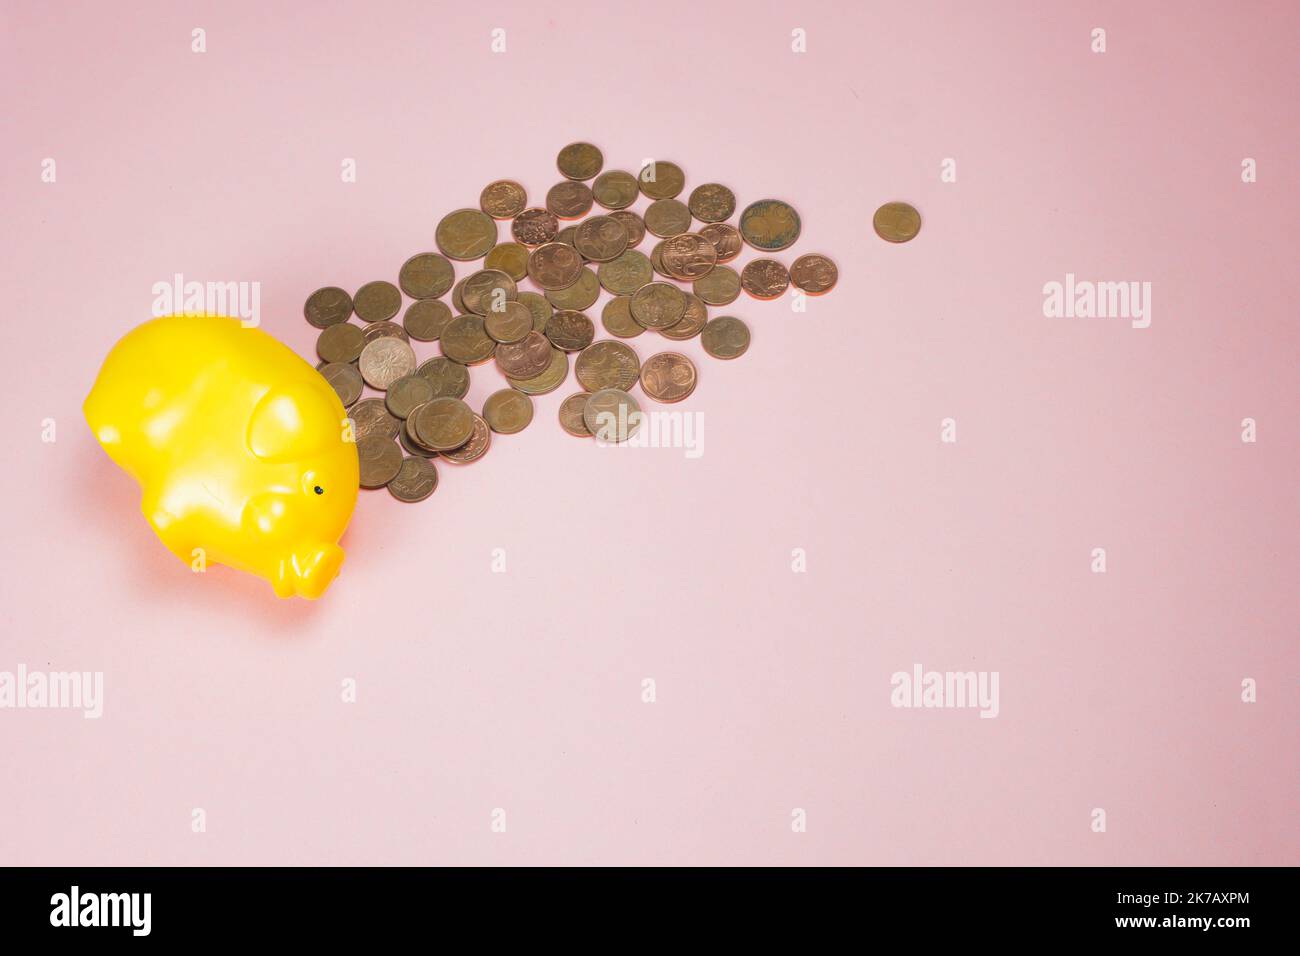 Yellow piggy bank on pink background with money withdrawn. Euro coins out of moneybox. Empty cash box as concept of earnings spending. Copy space. Stock Photo